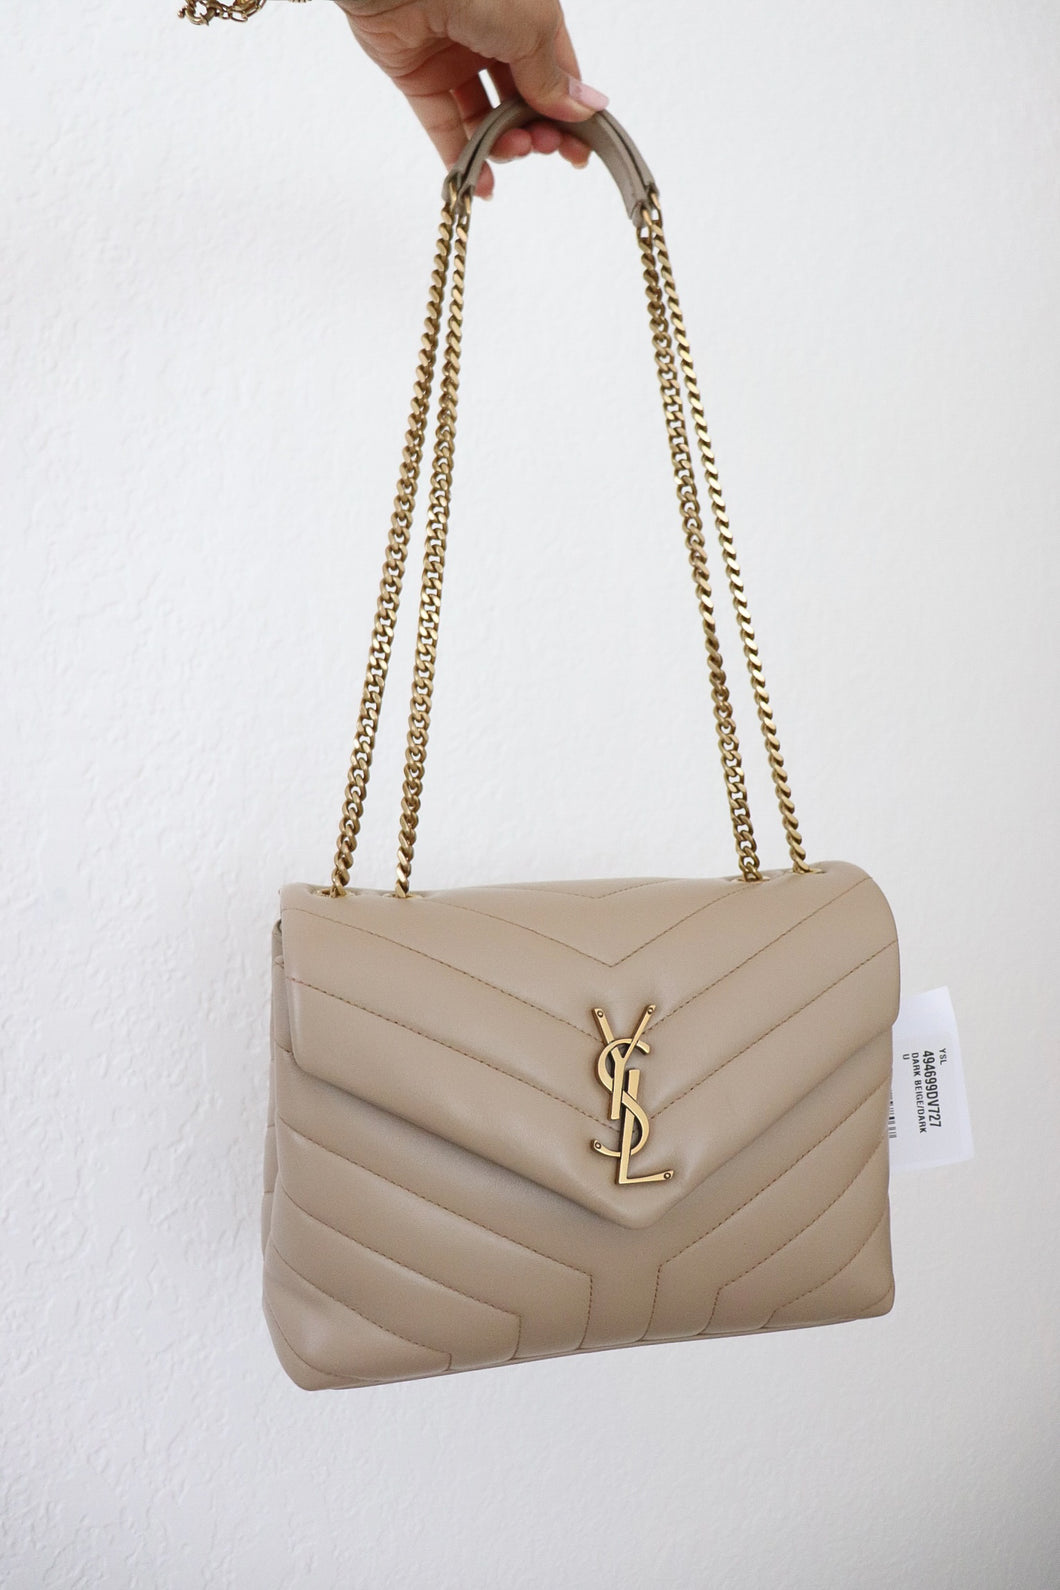 BRAND NEW YSL Loulou Bag in Quilted leather in beige (retails for 2650$)